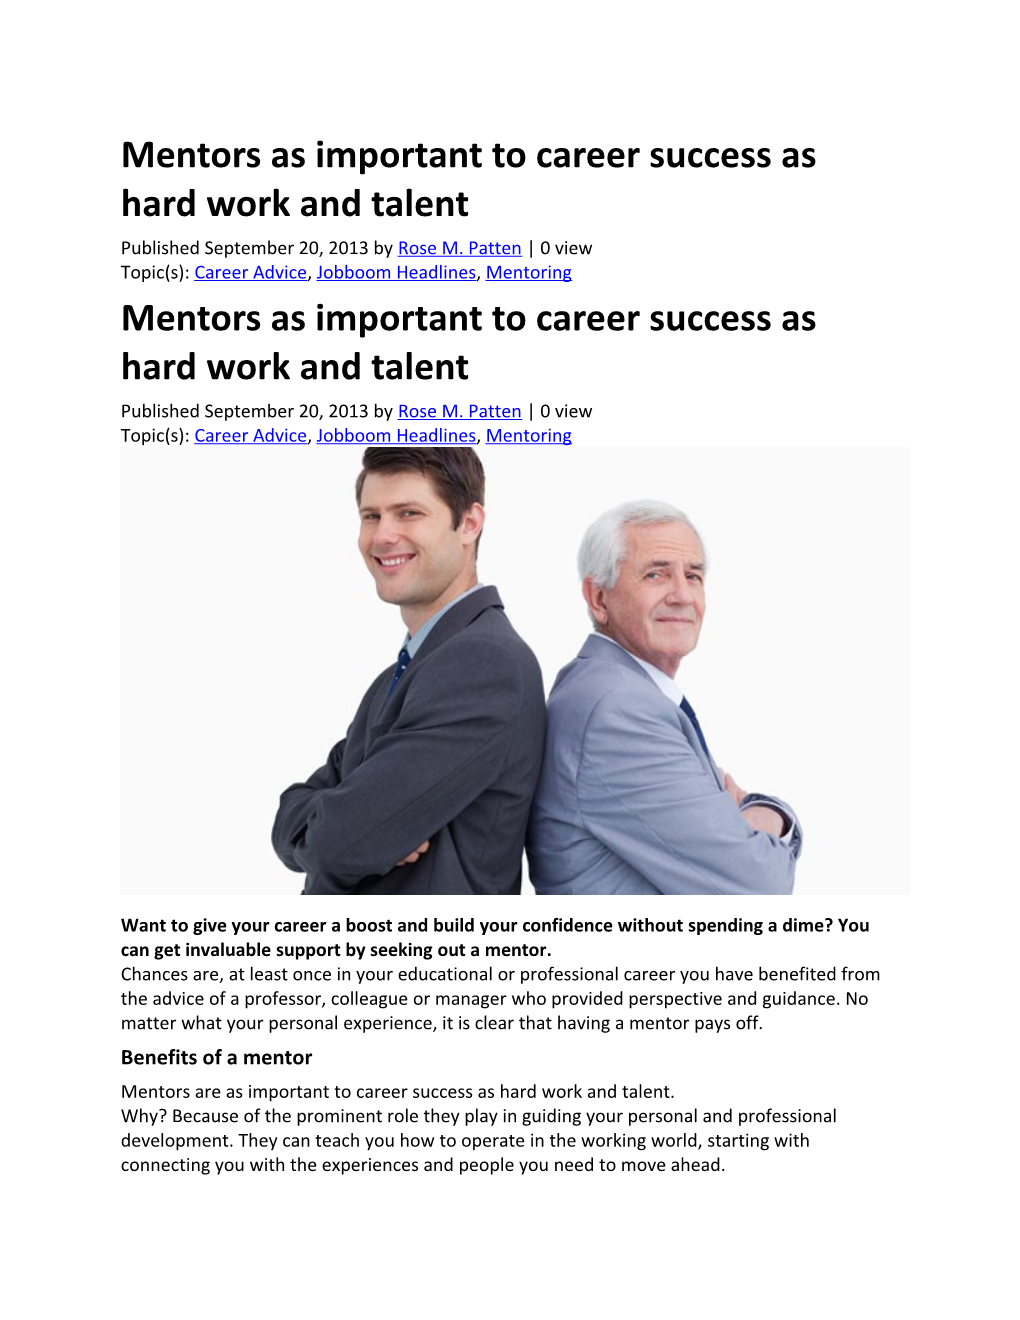 Mentors As Important to Career Success As Hard Work and Talent